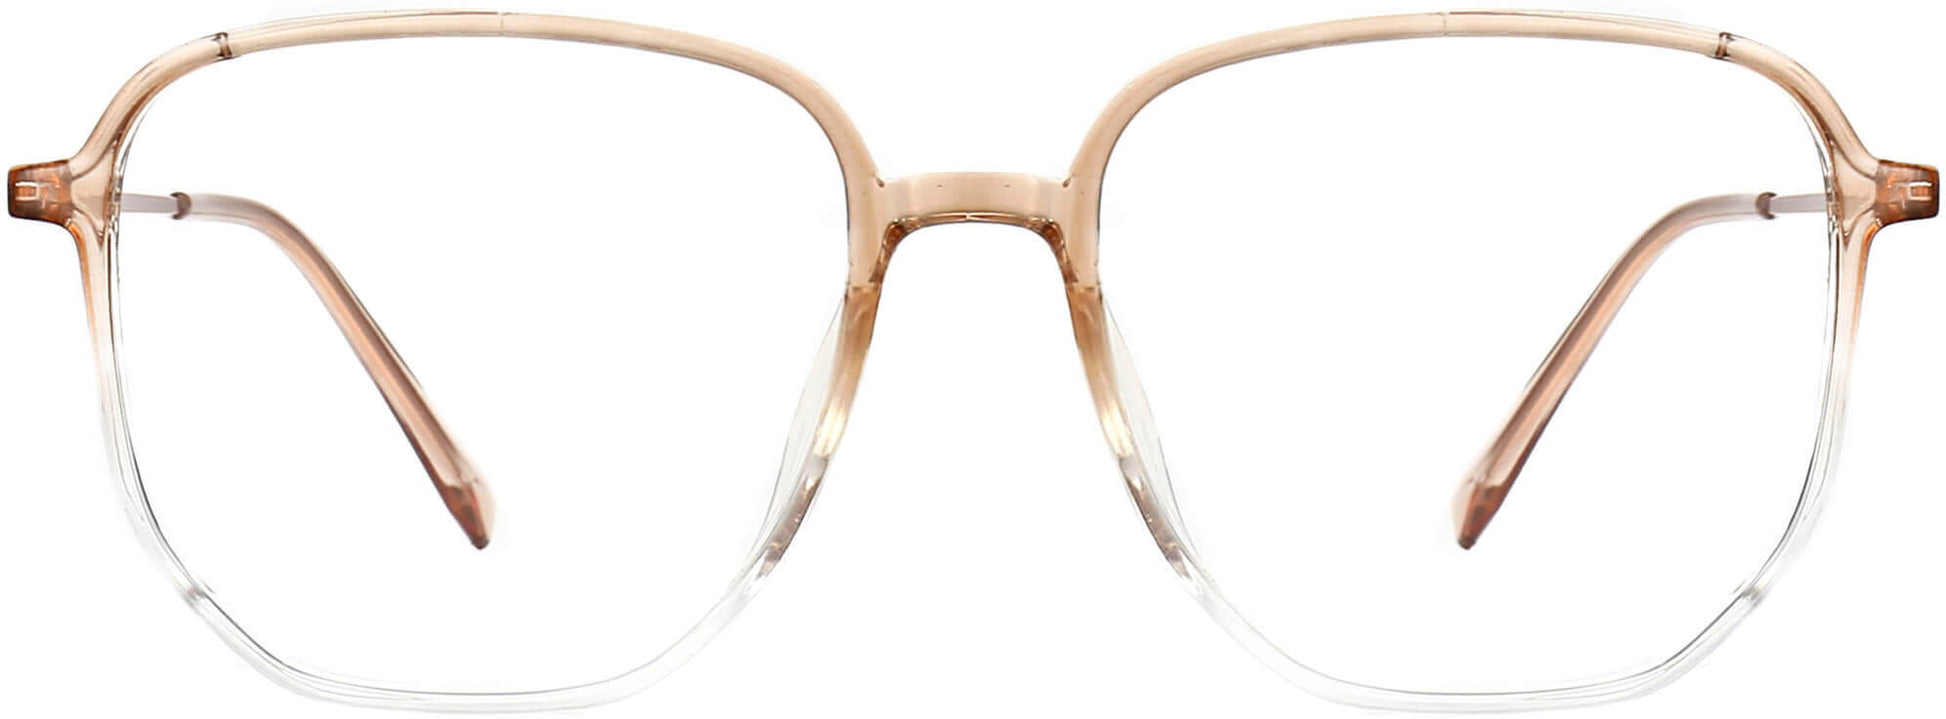 Leilani Geometric Clear Eyeglasses from ANRRI, front view